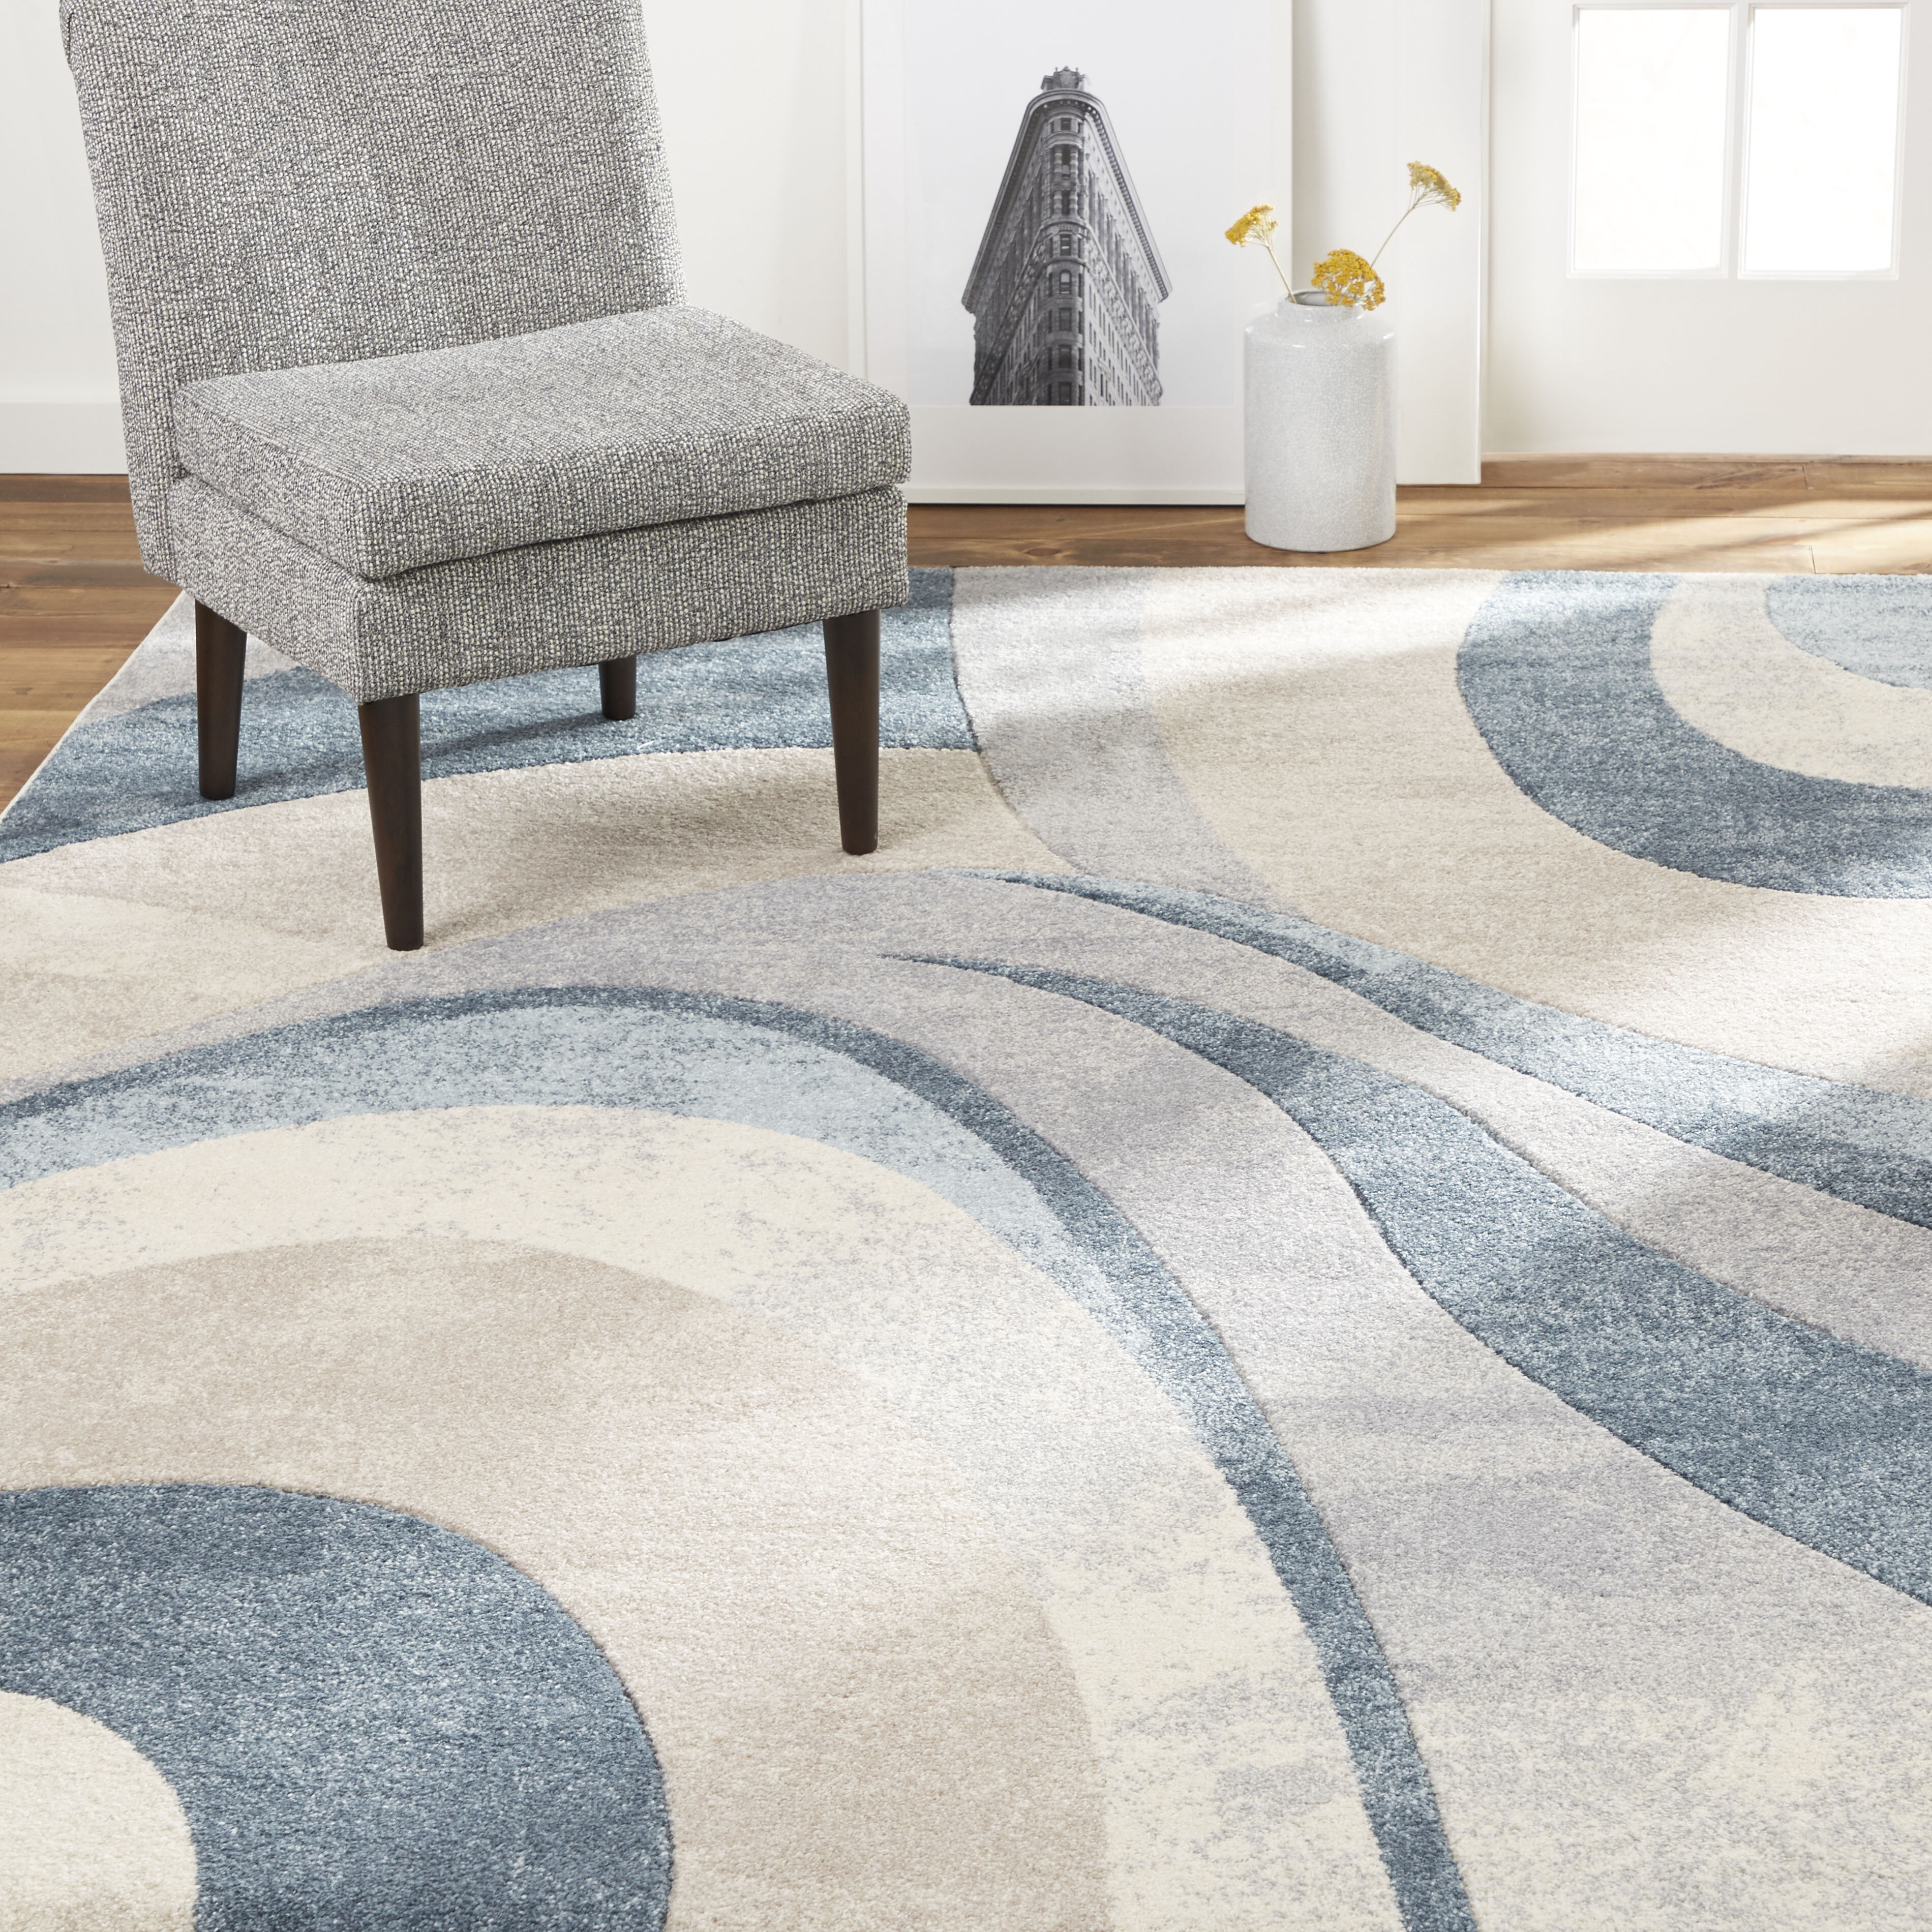 Abstract Contemporary Modern Design Mixed Brush Pattern Rug Carpet Home Decor 